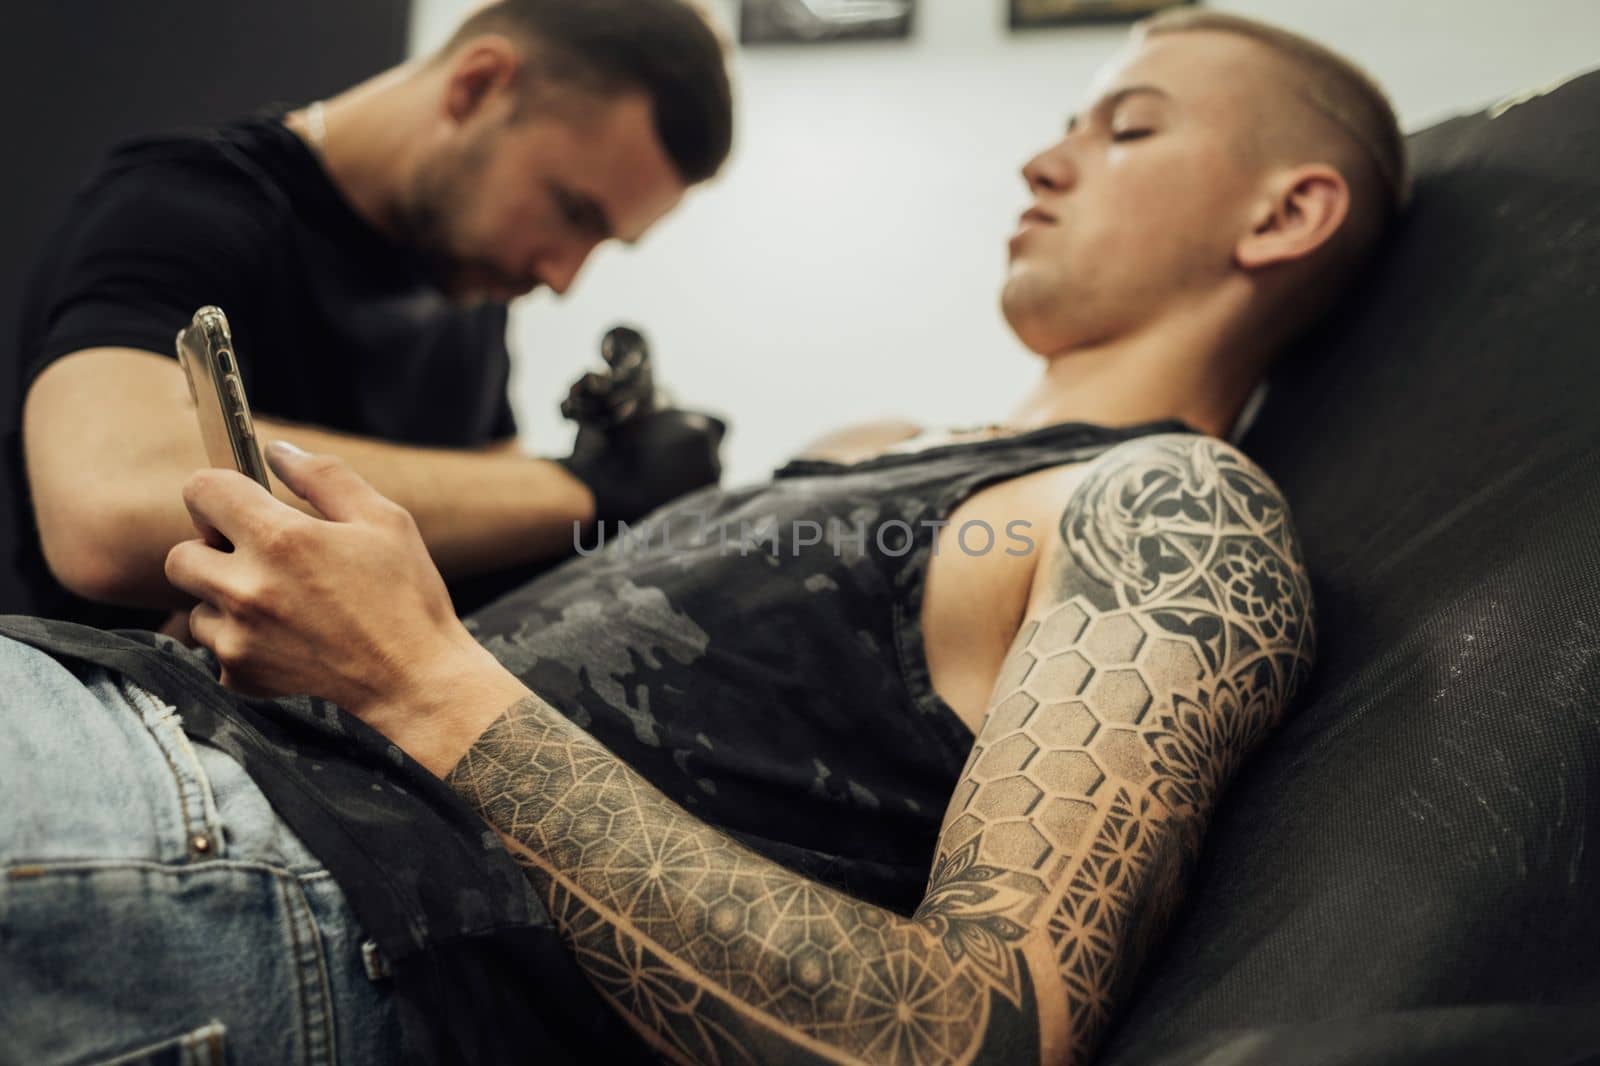 Tattooed Man Using Smartphone During Tattoo Session, Male Artist Draws on the Clients Skin by Romvy